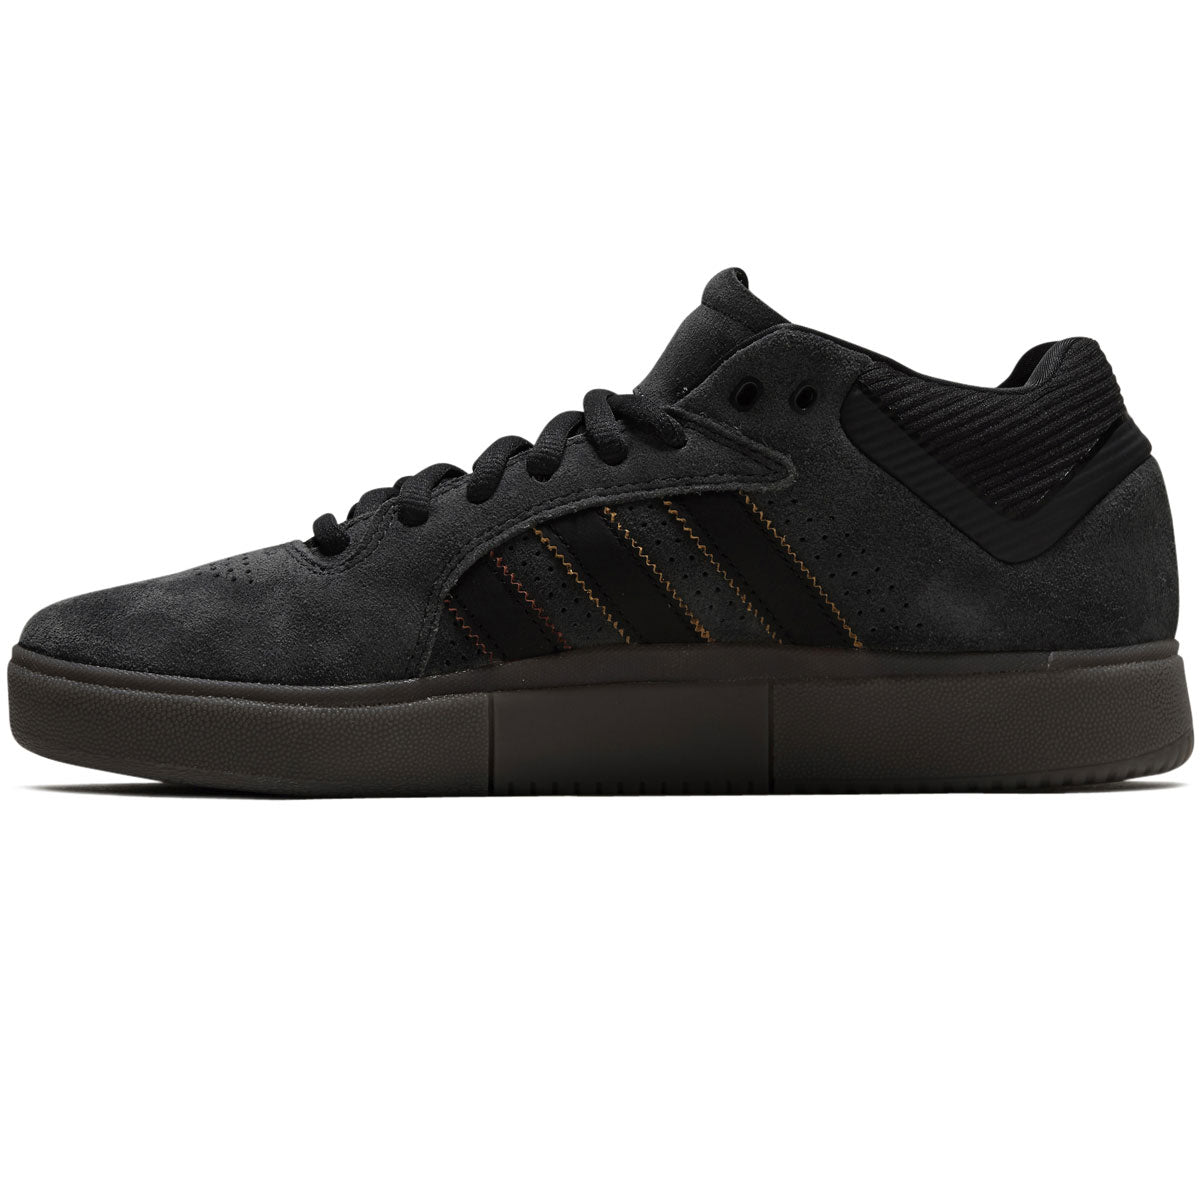 Adidas Tyshawn Shoes - Carbon/Core Black/Preloved Brown image 2